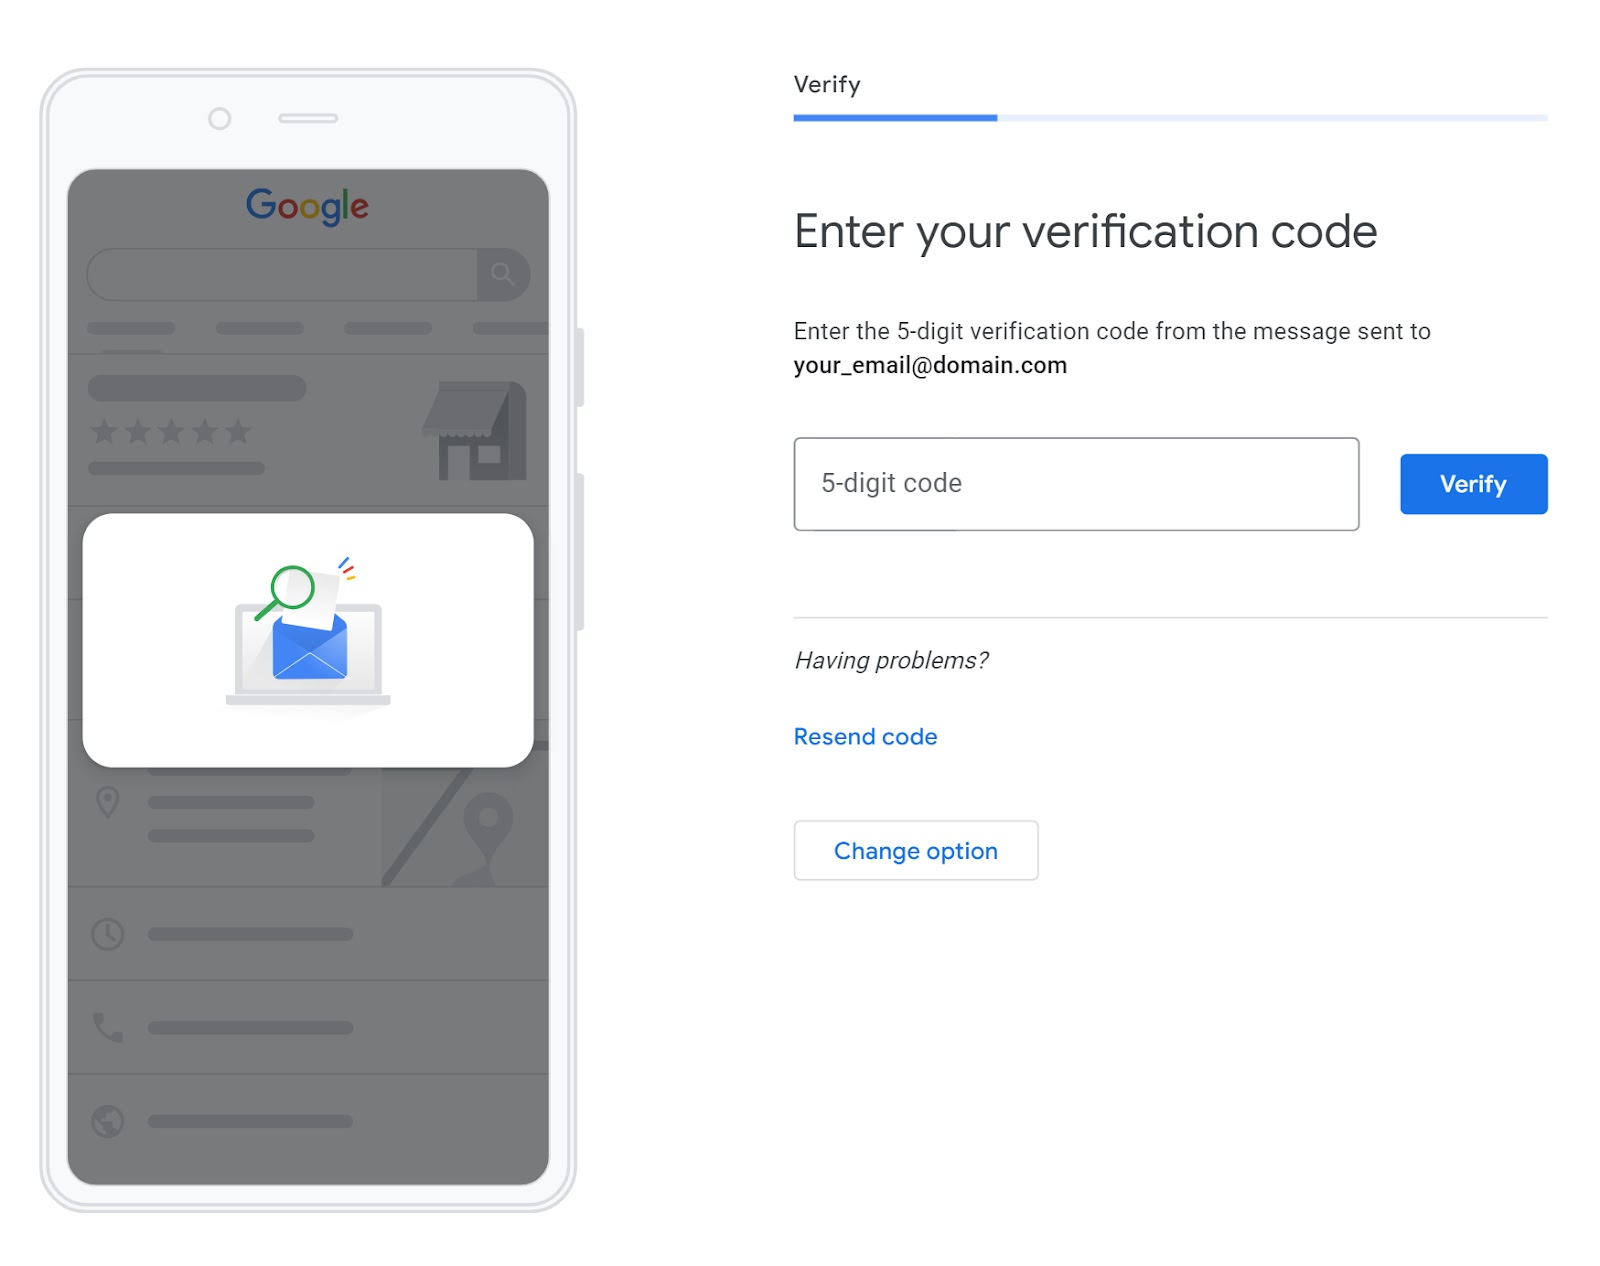 "Enter your verification code" screen in GBP